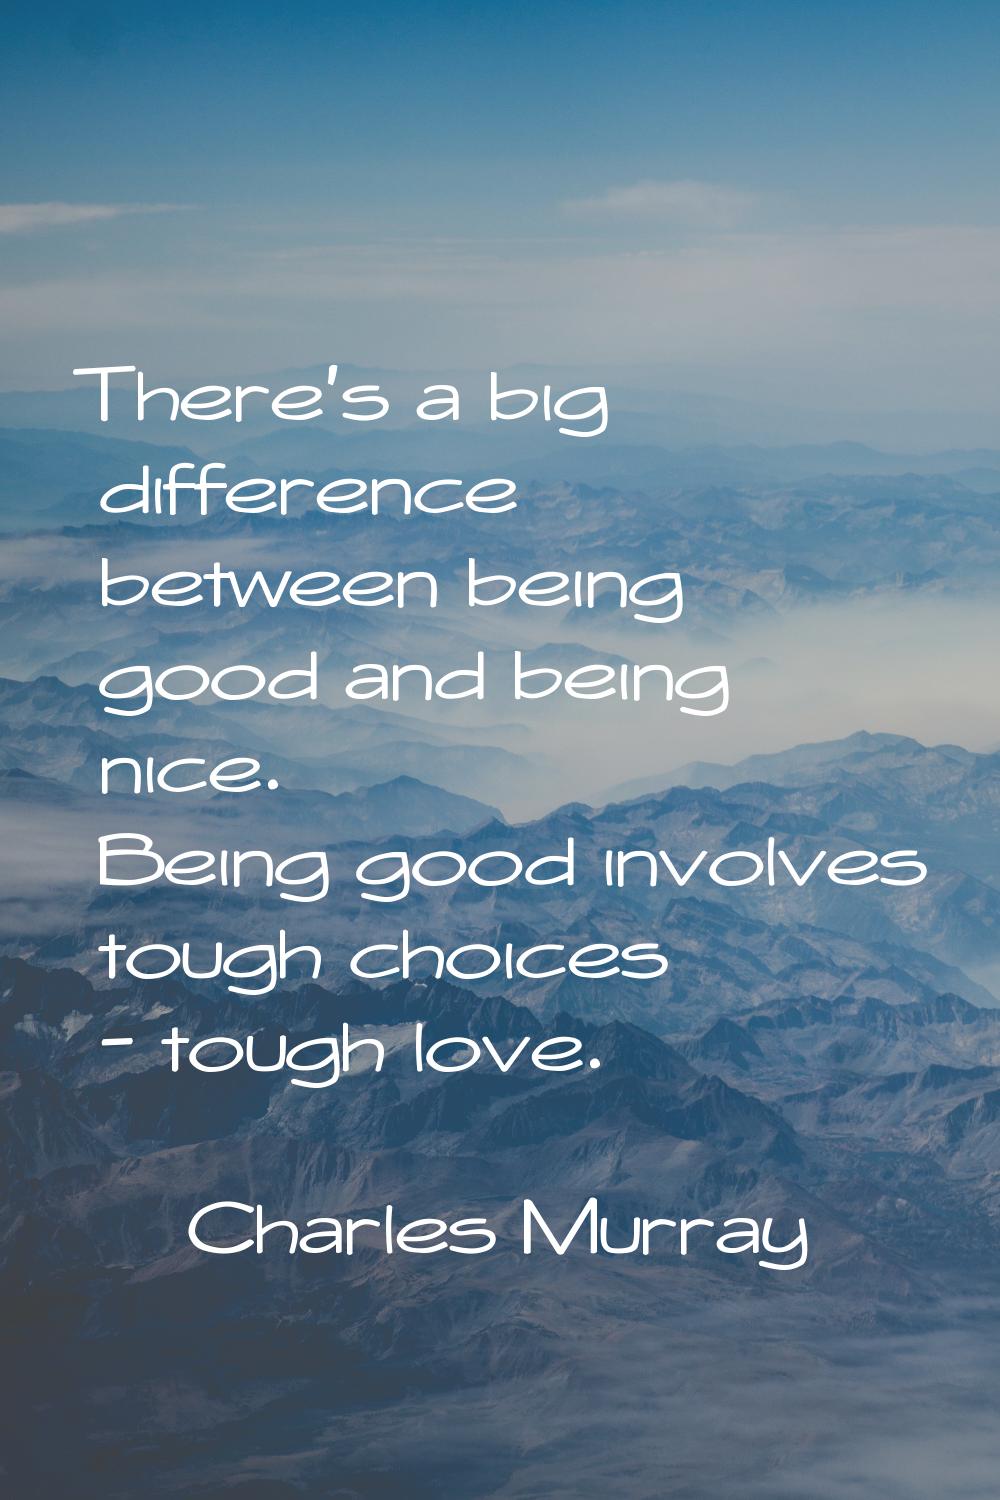 There's a big difference between being good and being nice. Being good involves tough choices - tou